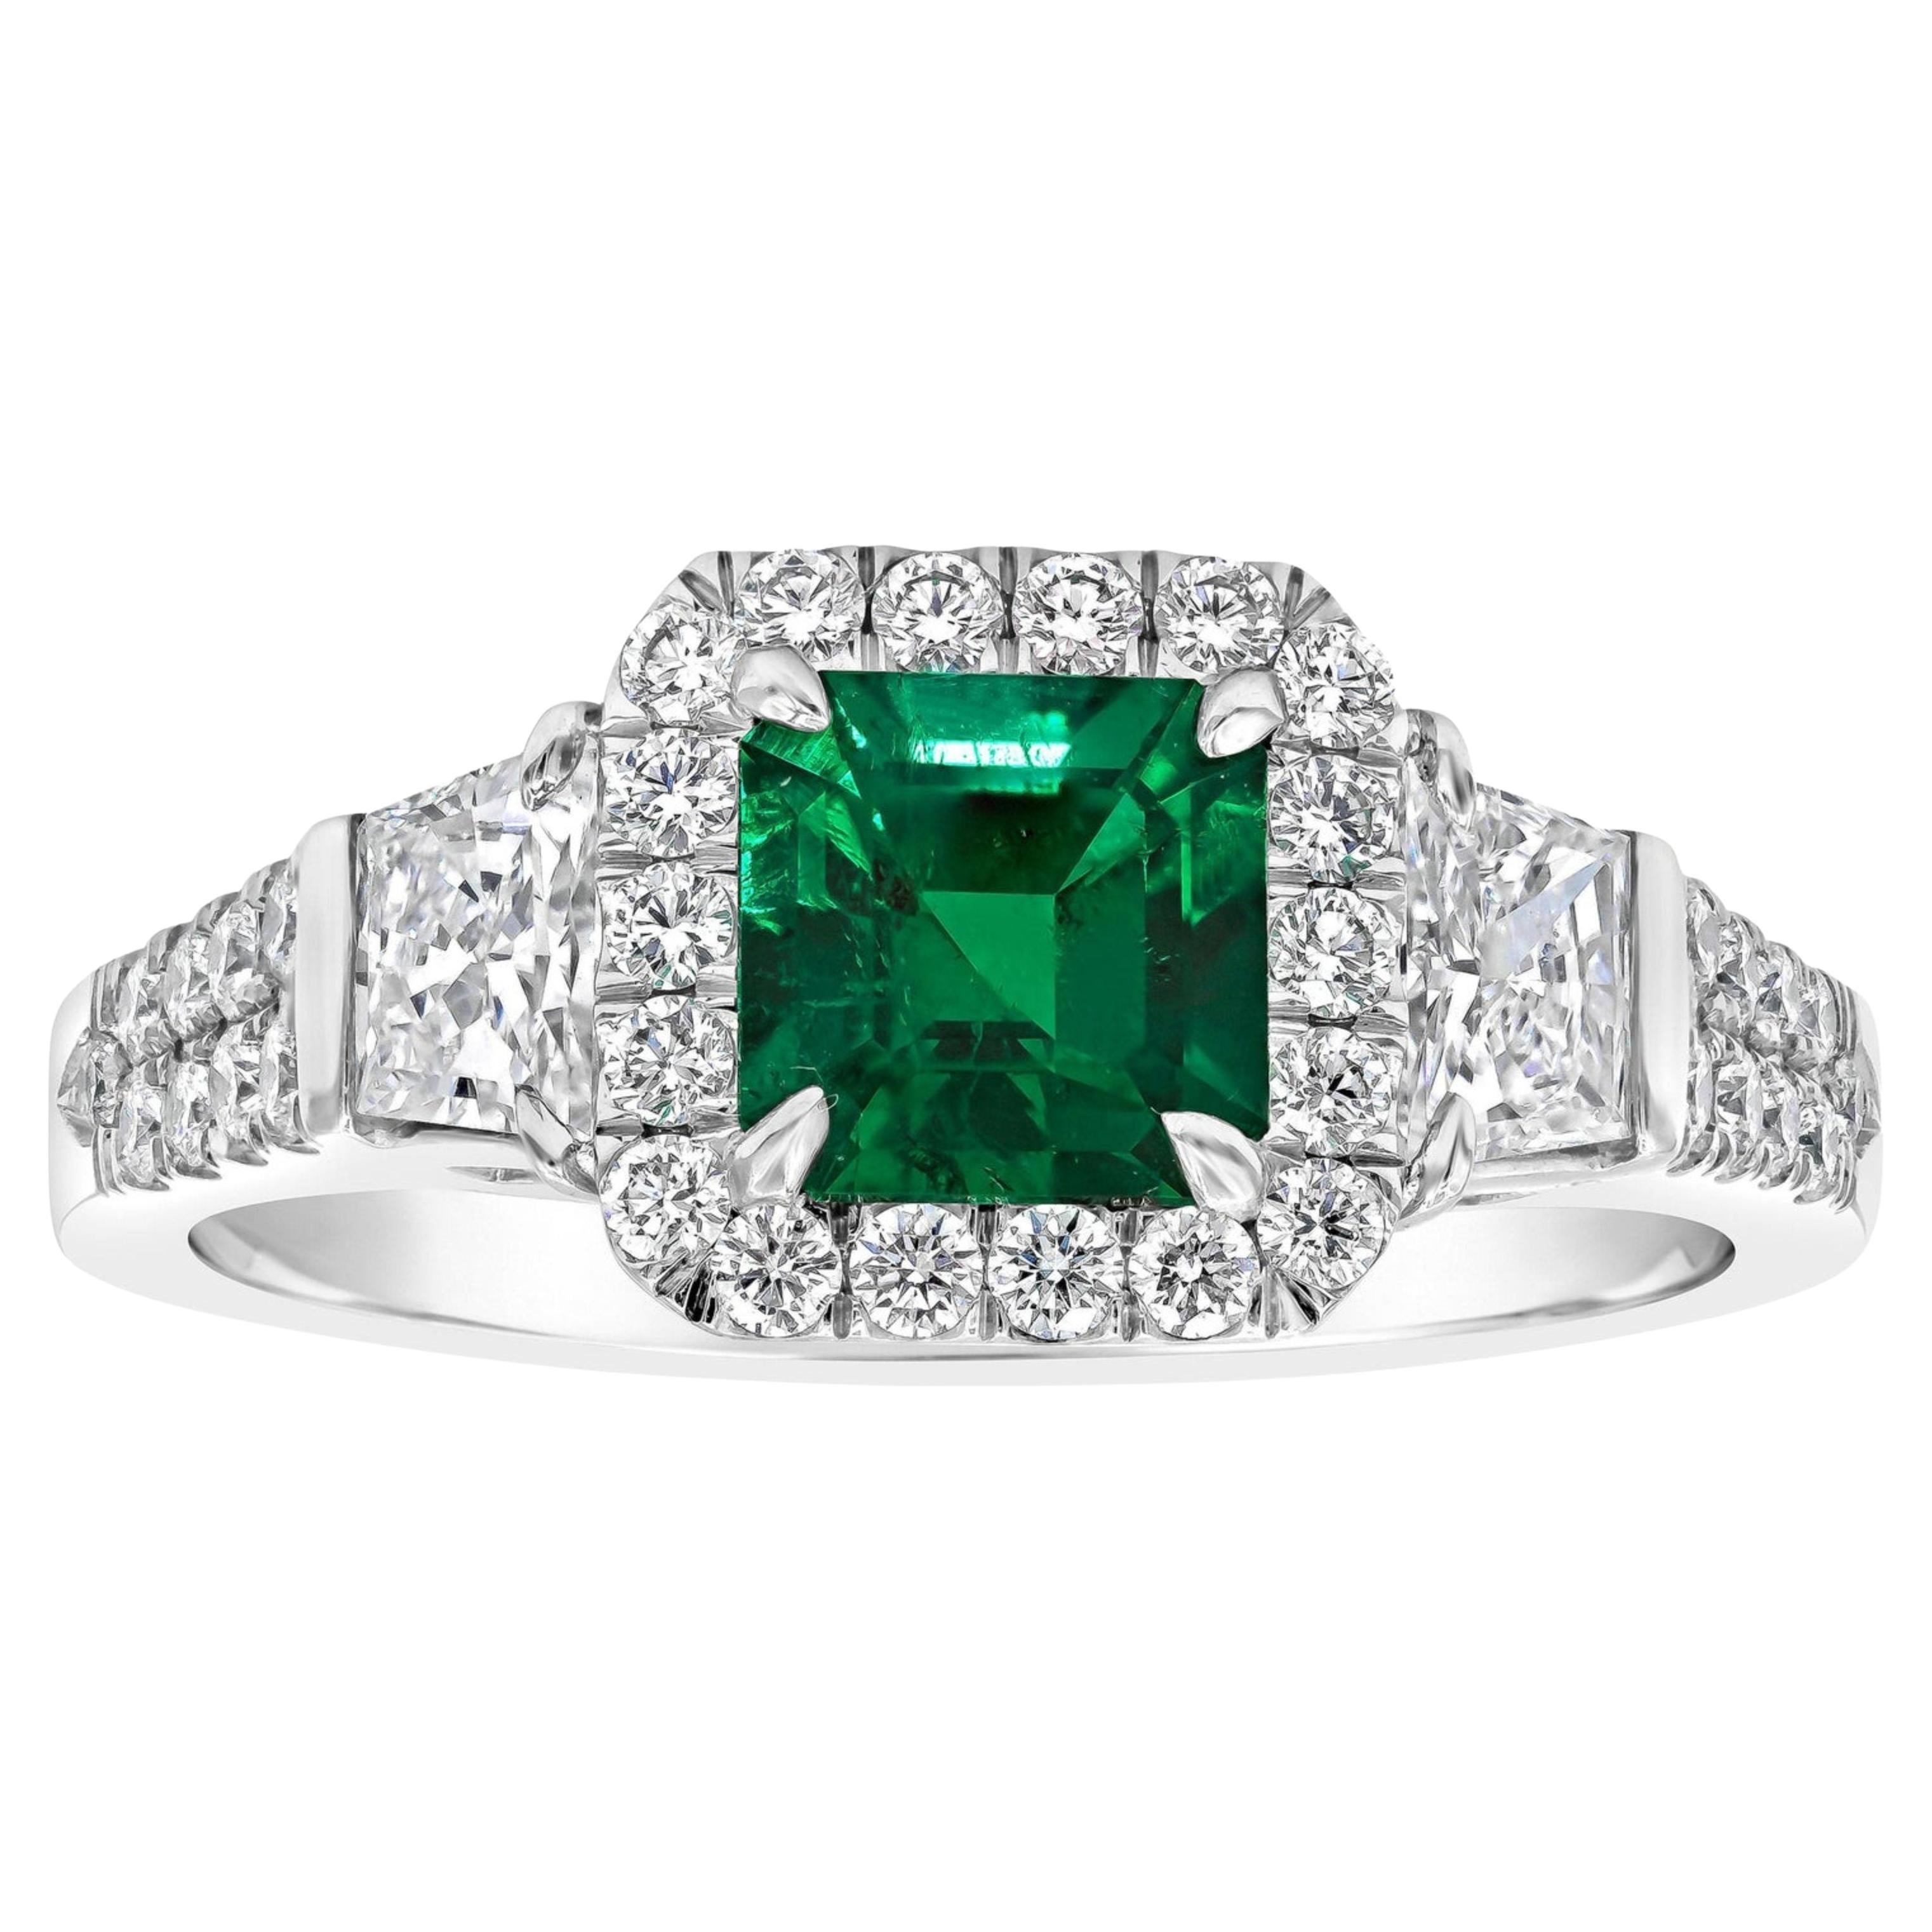 For Sale:  Emerald Cut Emerald and Diamonds Three-Stone Engagement Ring